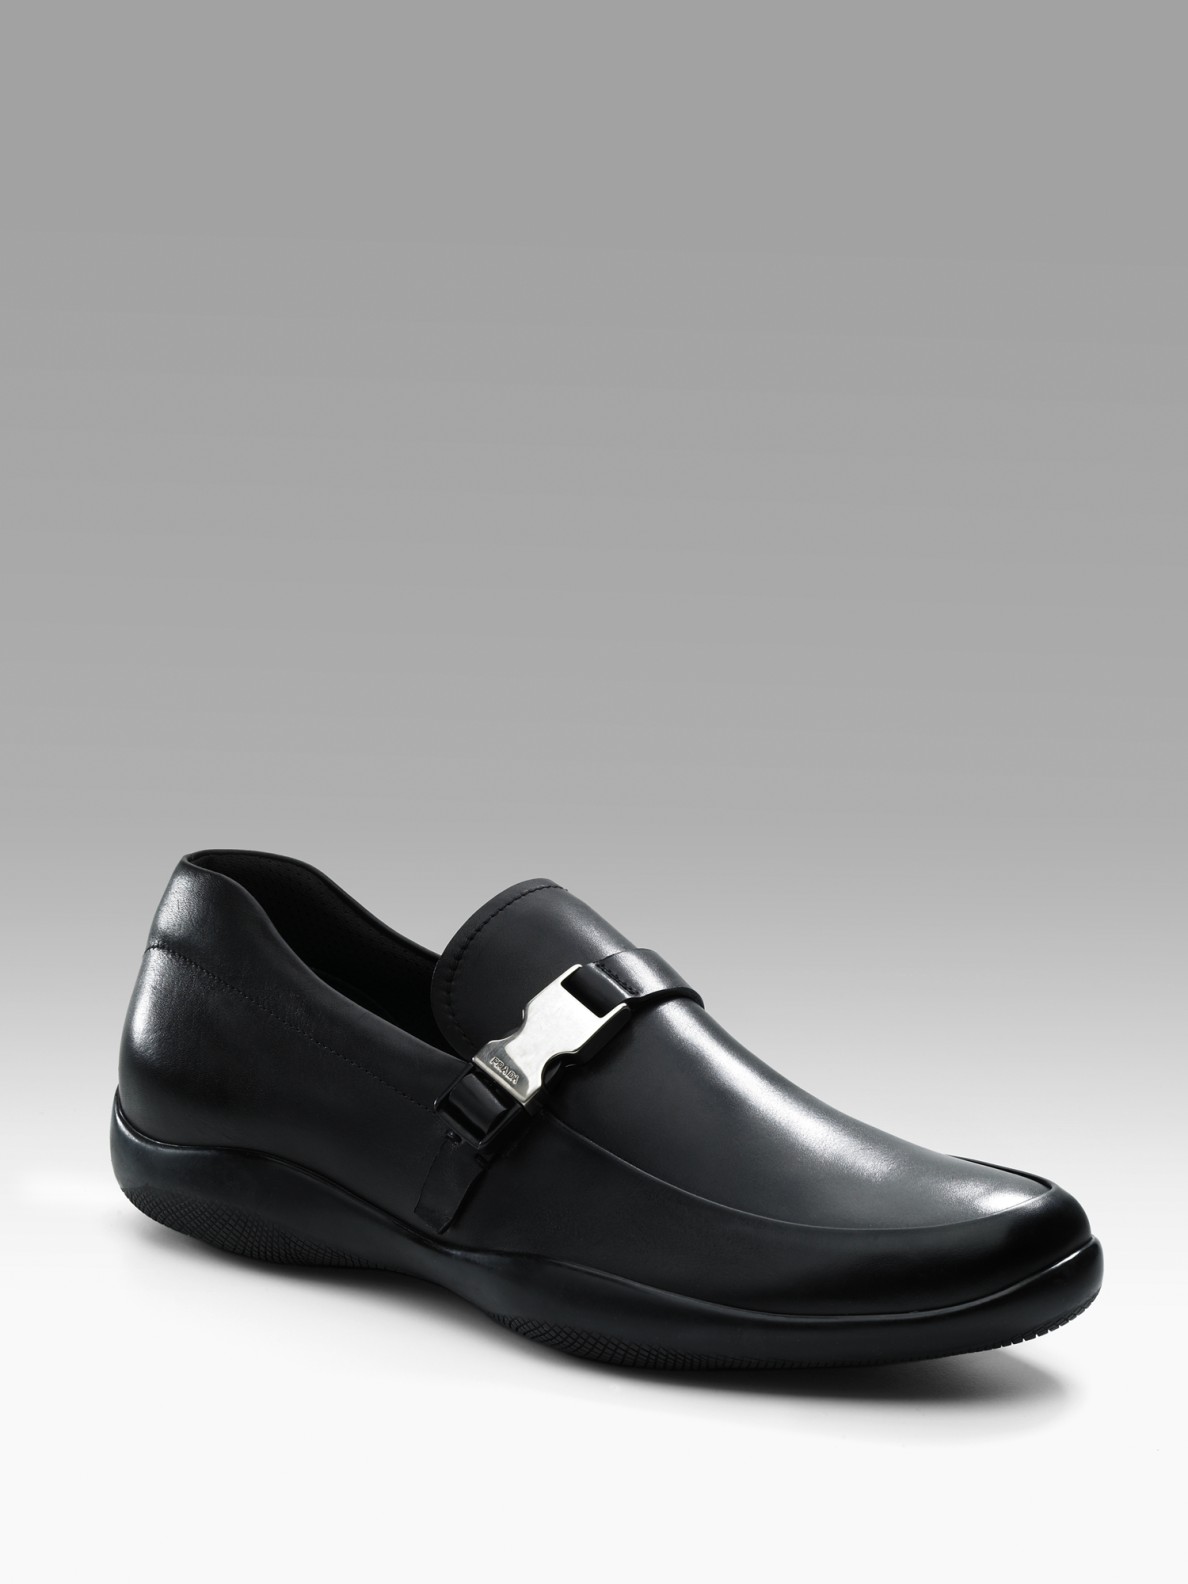 Prada Buckle Loafer Cheap Sale, SAVE 39% - aveclumiere.com